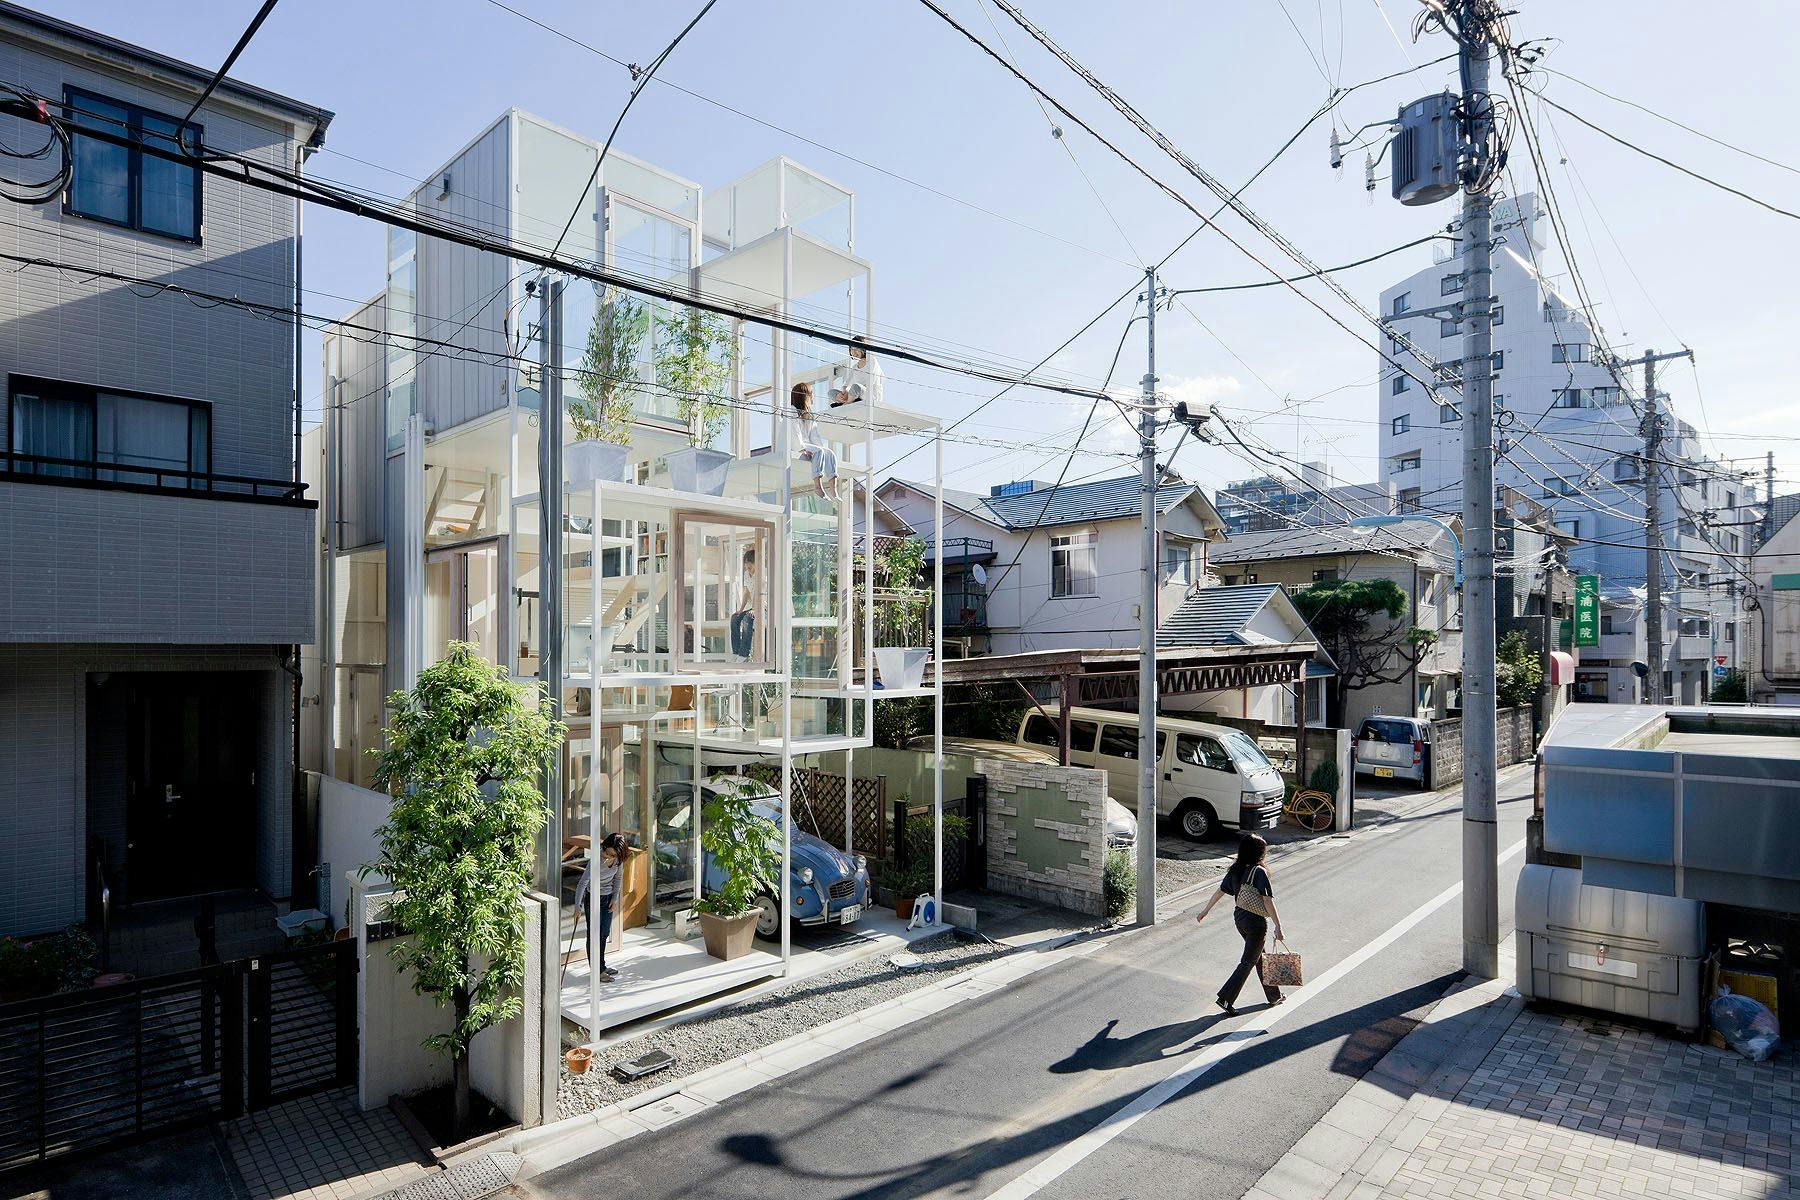 The exterior of House Na by Sou Fujimoto in Tokyo, Japan | Photo by Iwan Baan